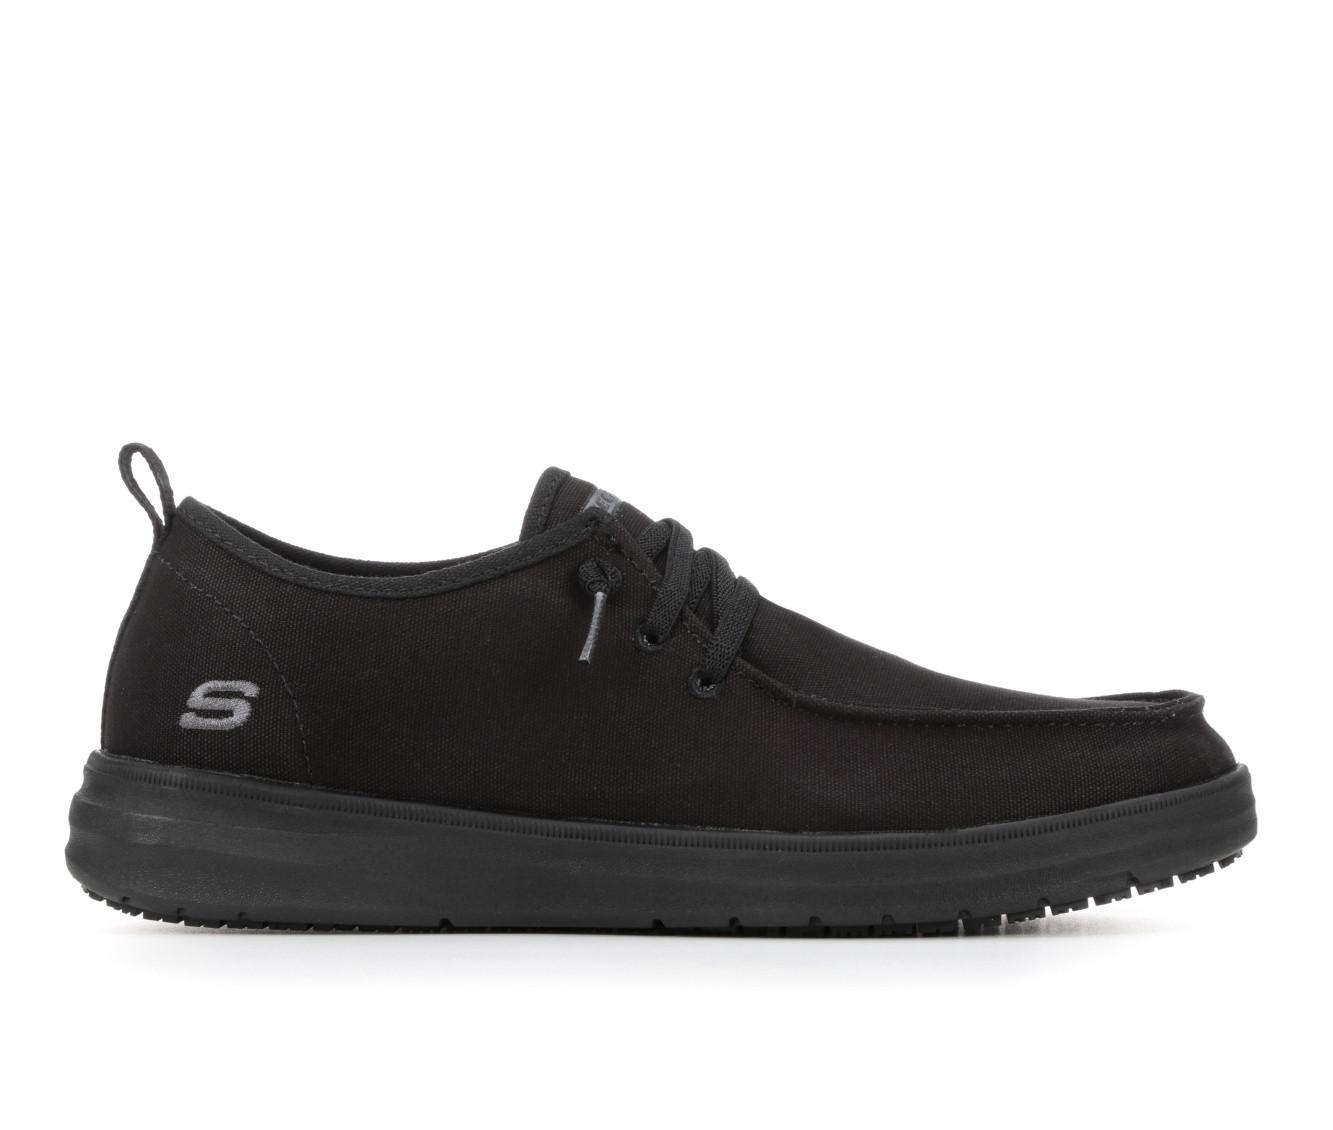 The best of Skechers' Men's Apparel collection - Attitude